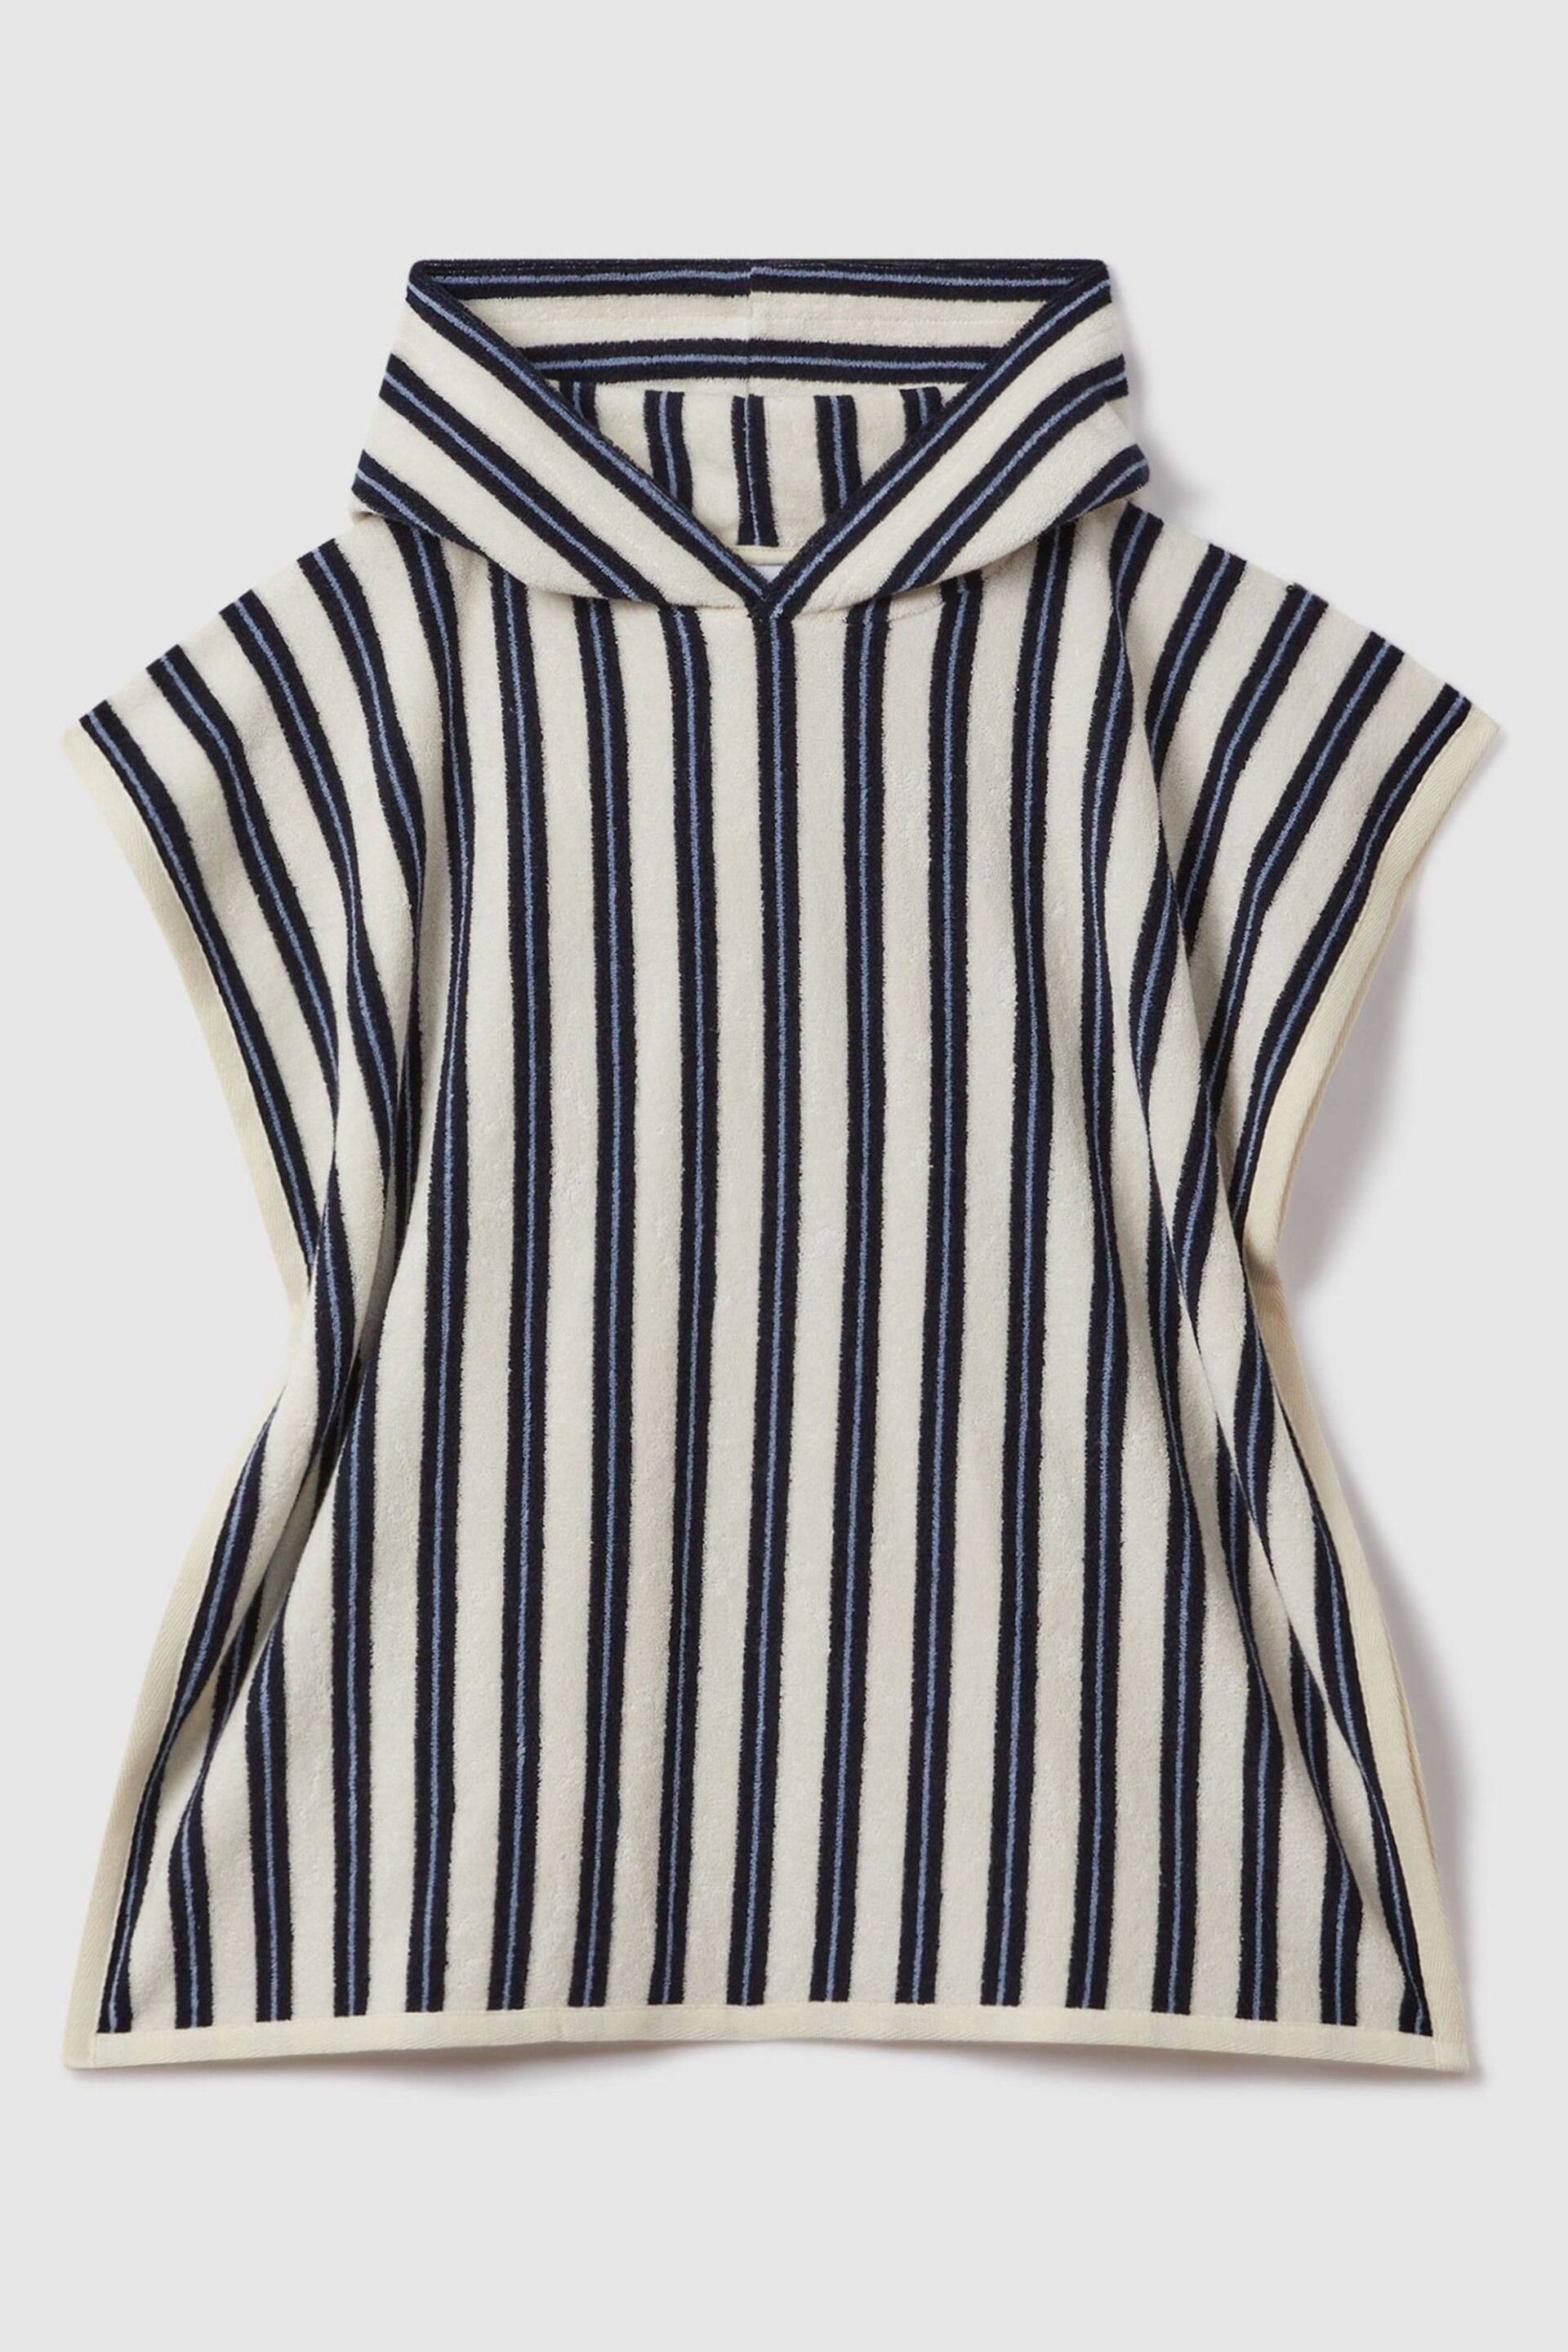 Reiss Navy Ray Junior Hooded Towelling Poncho - Image 1 of 3